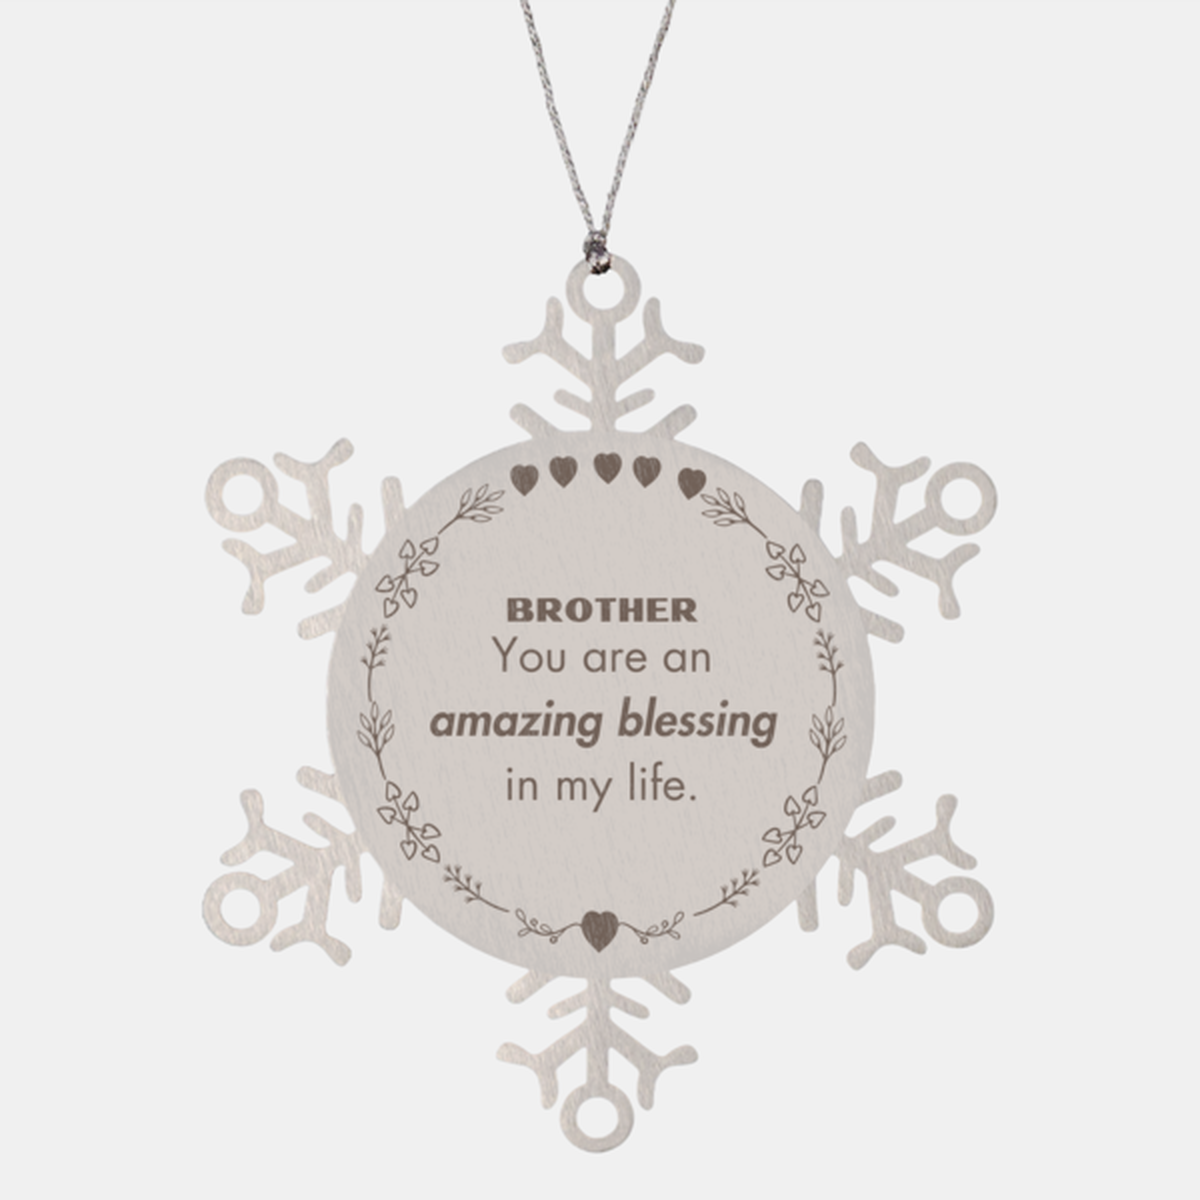 Brother Snowflake Ornament, You are an amazing blessing in my life, Thank You Gifts For Brother, Inspirational Birthday Christmas Unique Gifts For Brother